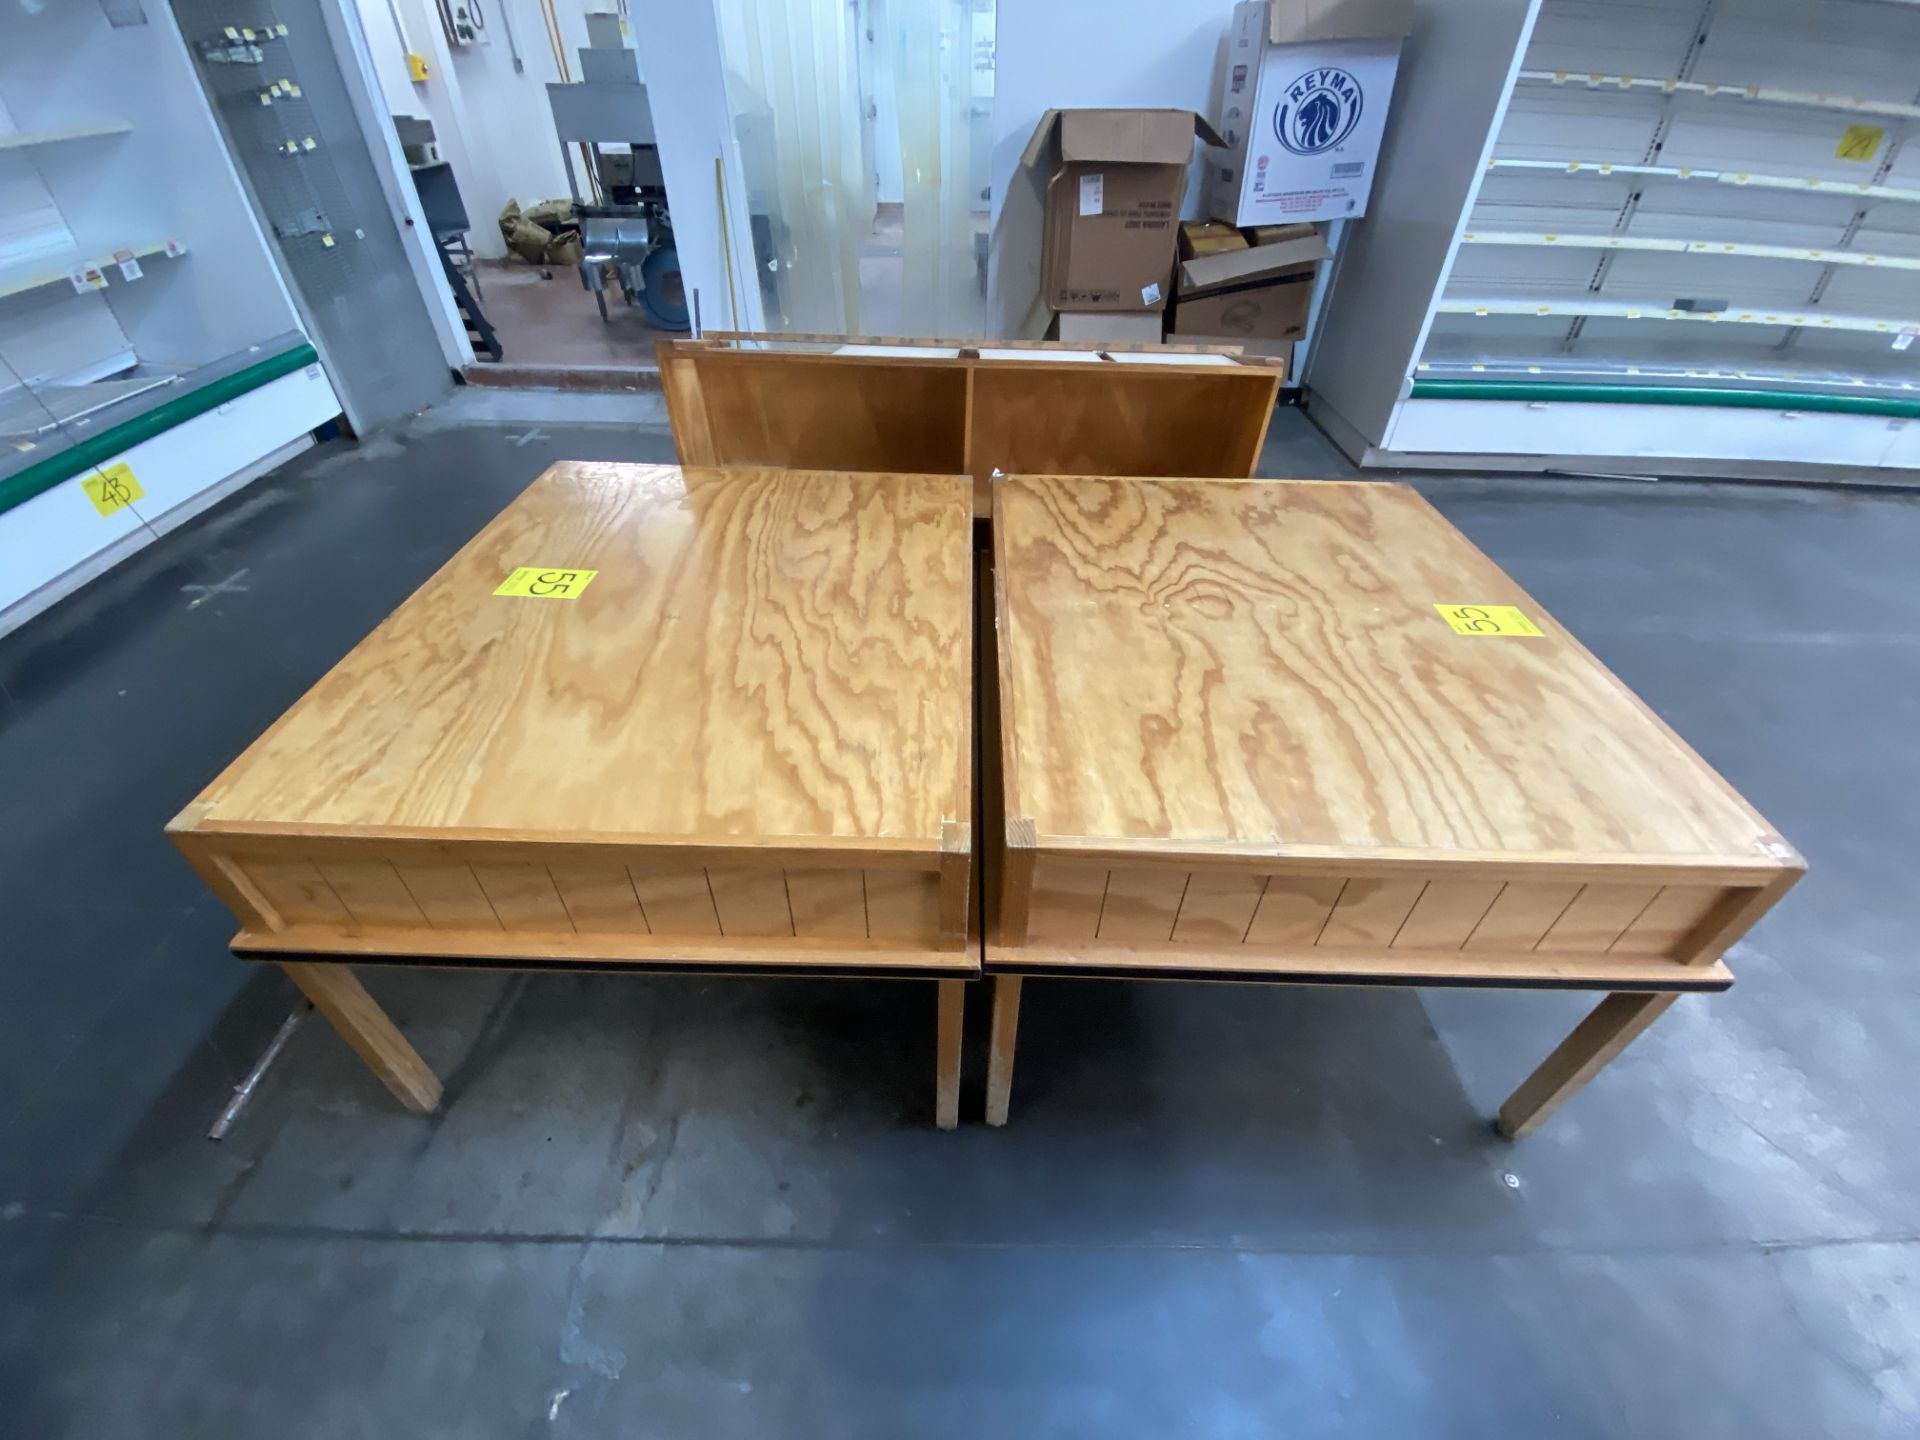 3 wooden tables for exhibition, measures 1.20 x 1.00 x 0.80; wooden Display cabinet for tortillas - Image 10 of 13